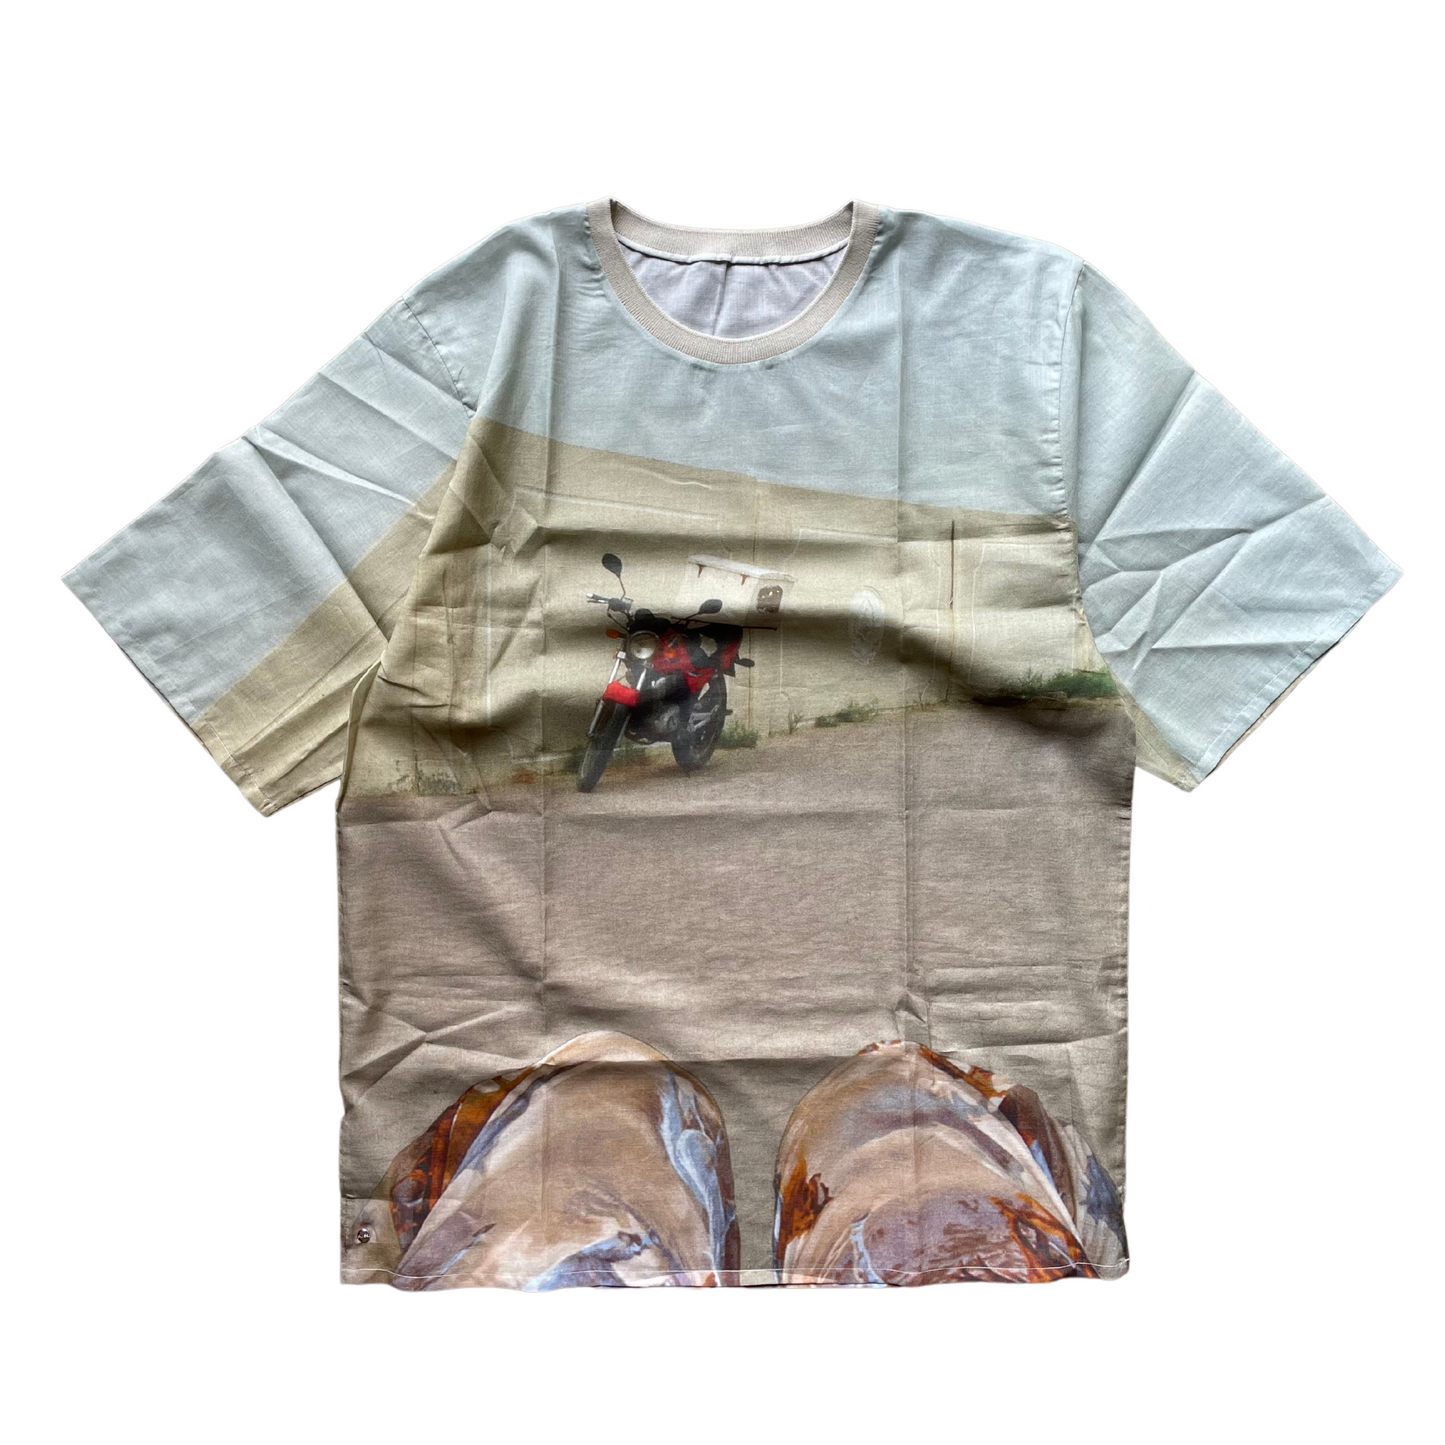 BLESS - Holidaymotorcycle tee